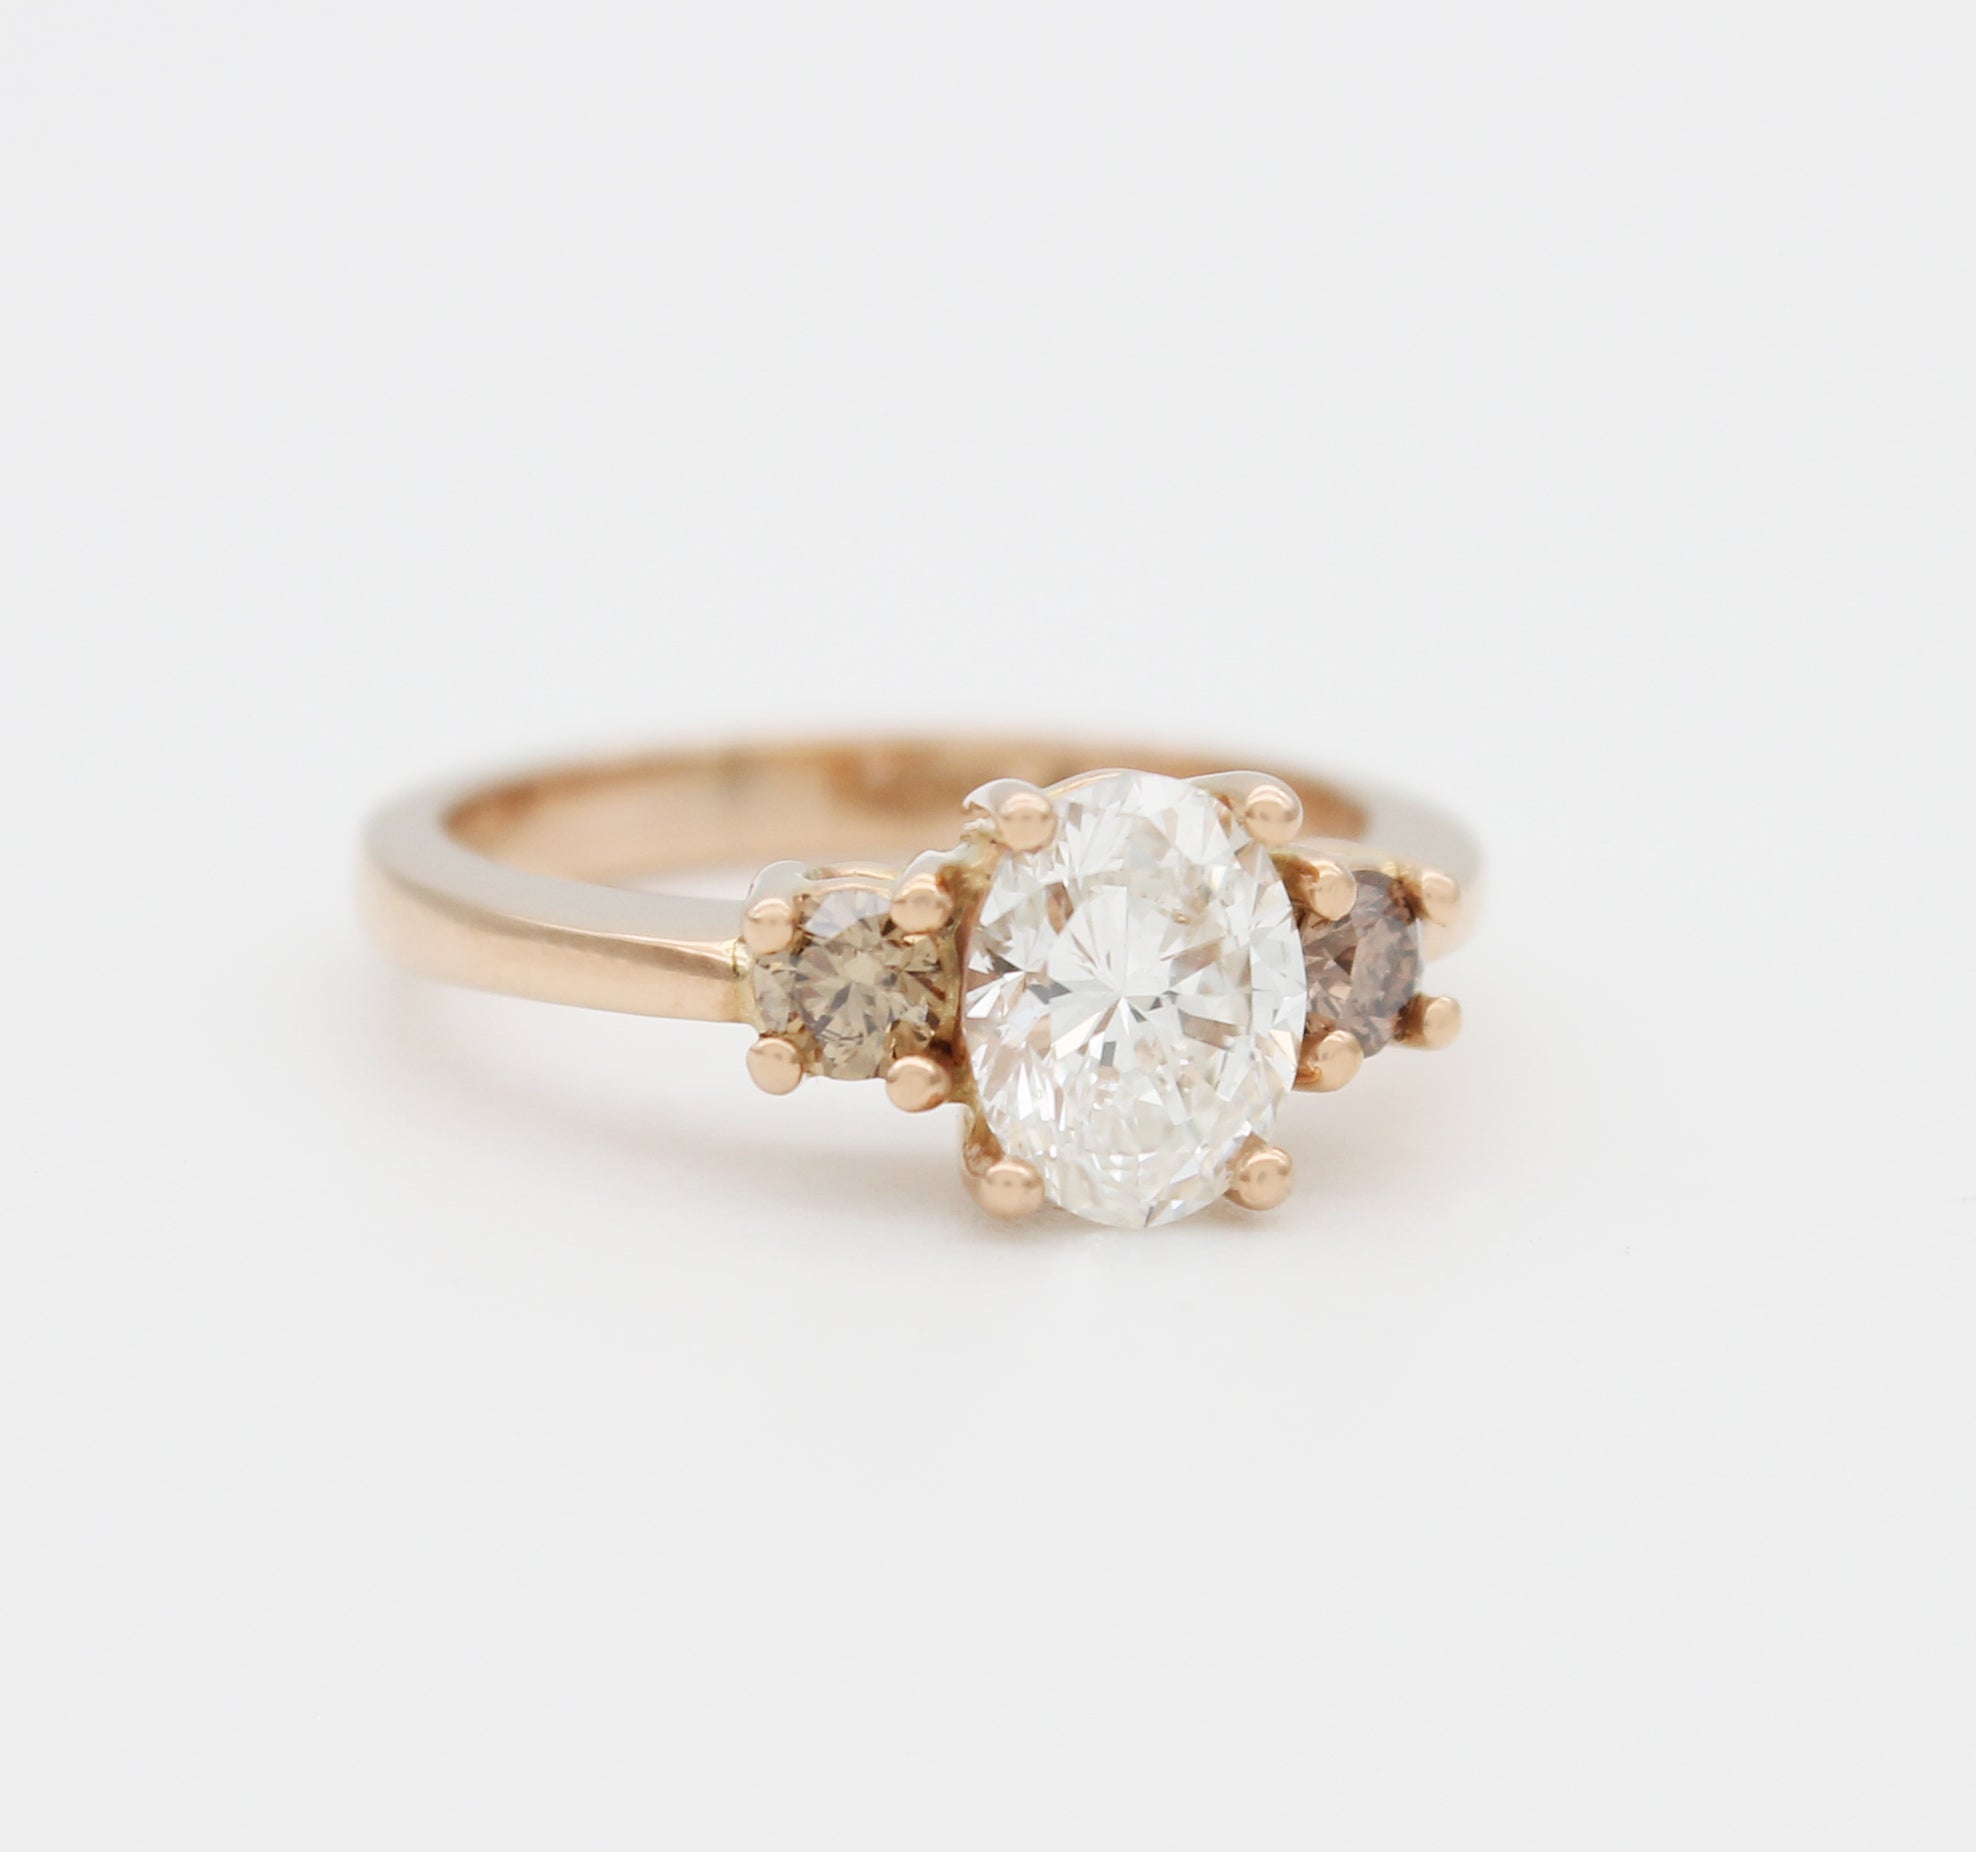 Oval diamond cognac champagne rose gold trilogy ring